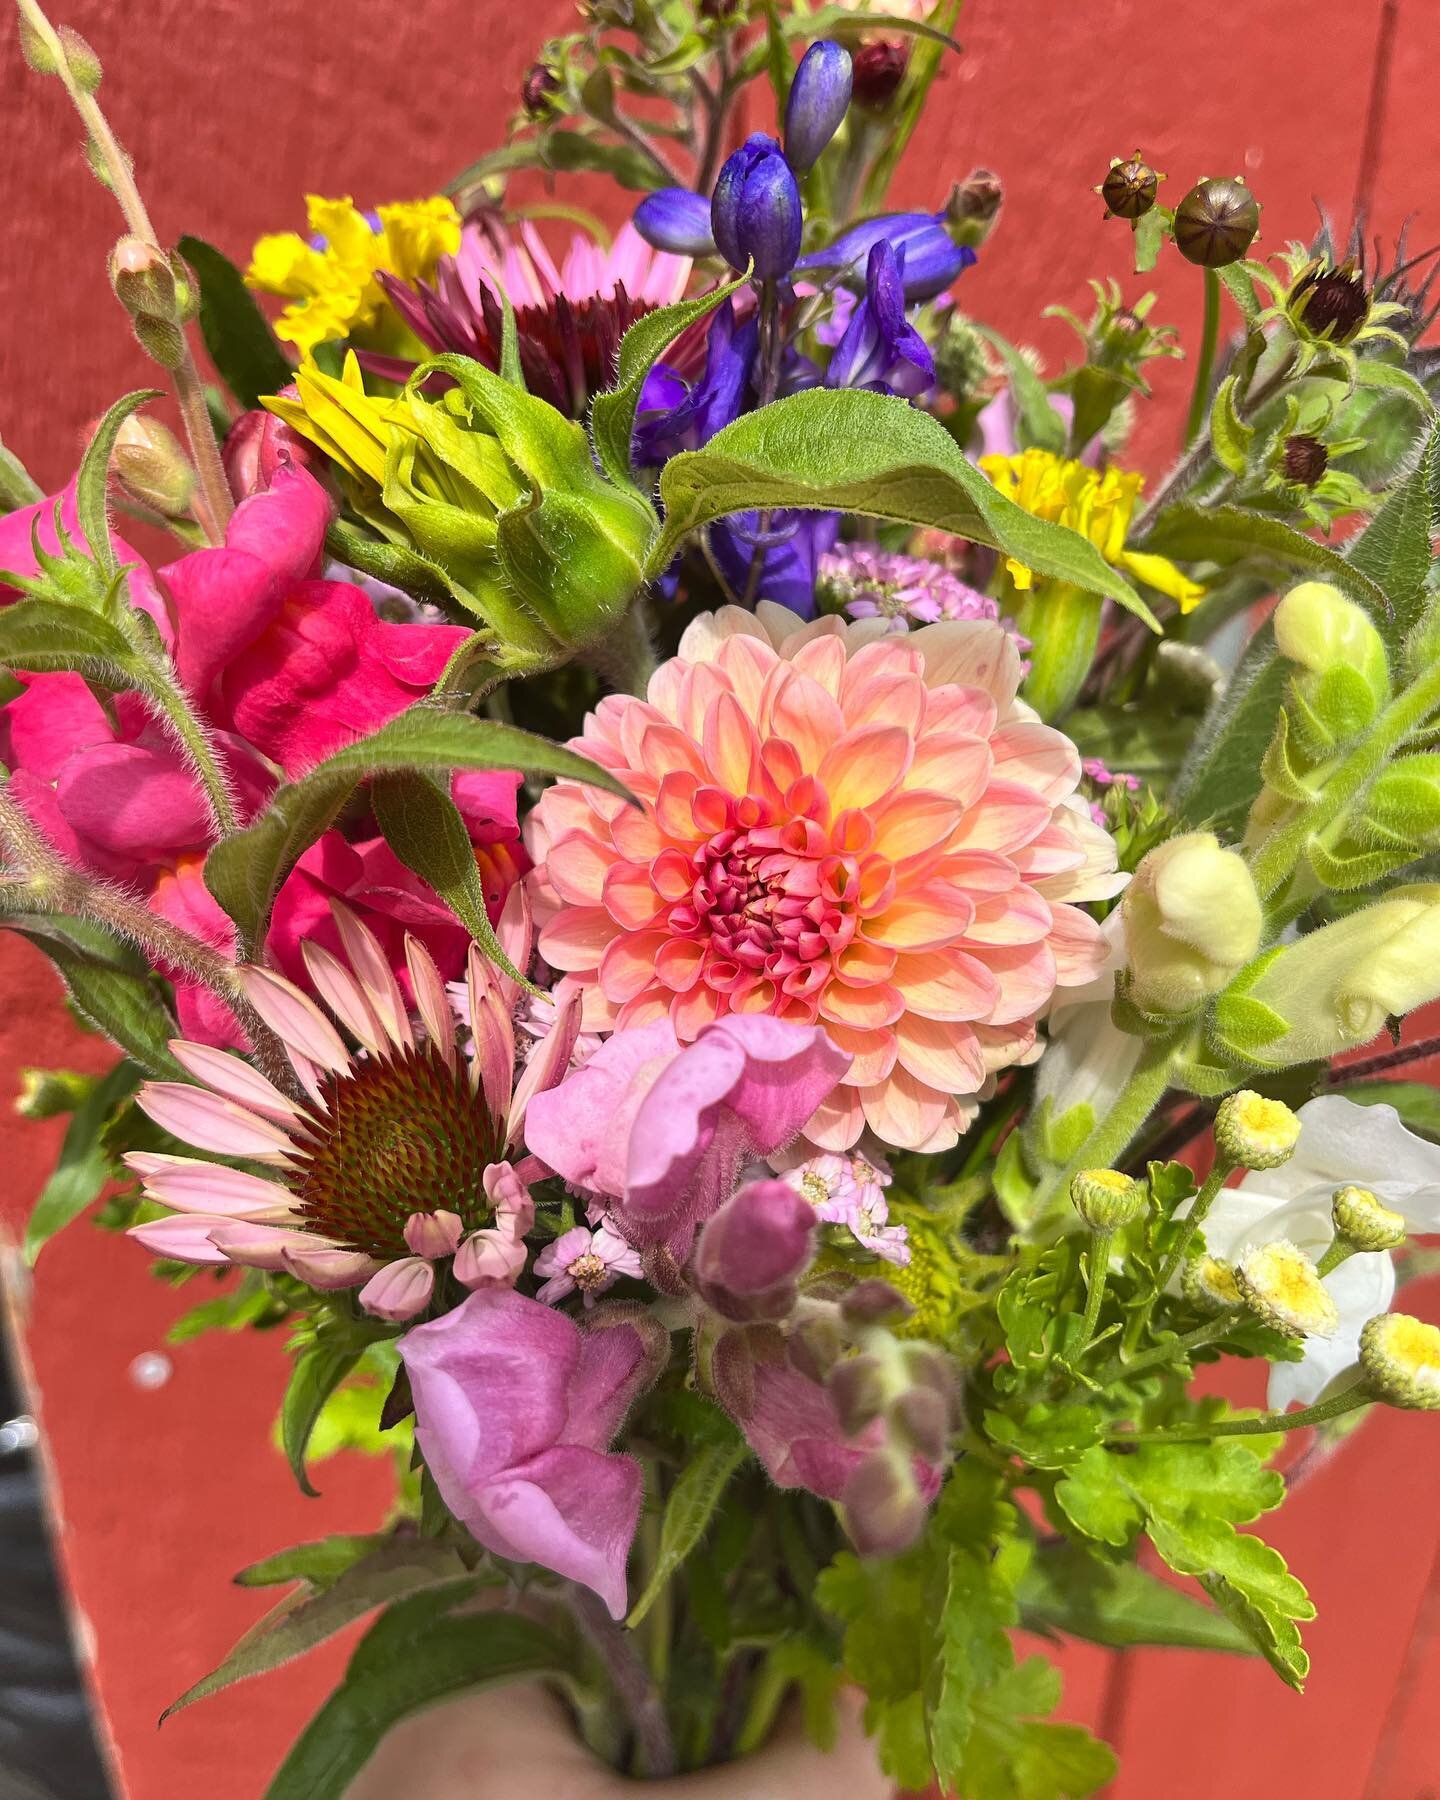 What a difference a day makes (except if you&rsquo;re a flower looking for rain). Lots of new blooms&mdash;dahlias, sweet peas, ageratum, echinacea&mdash;in the bouquets just dropped at @wildoatsbakery and The Vegetable Corner (Harpswell). Ready for 